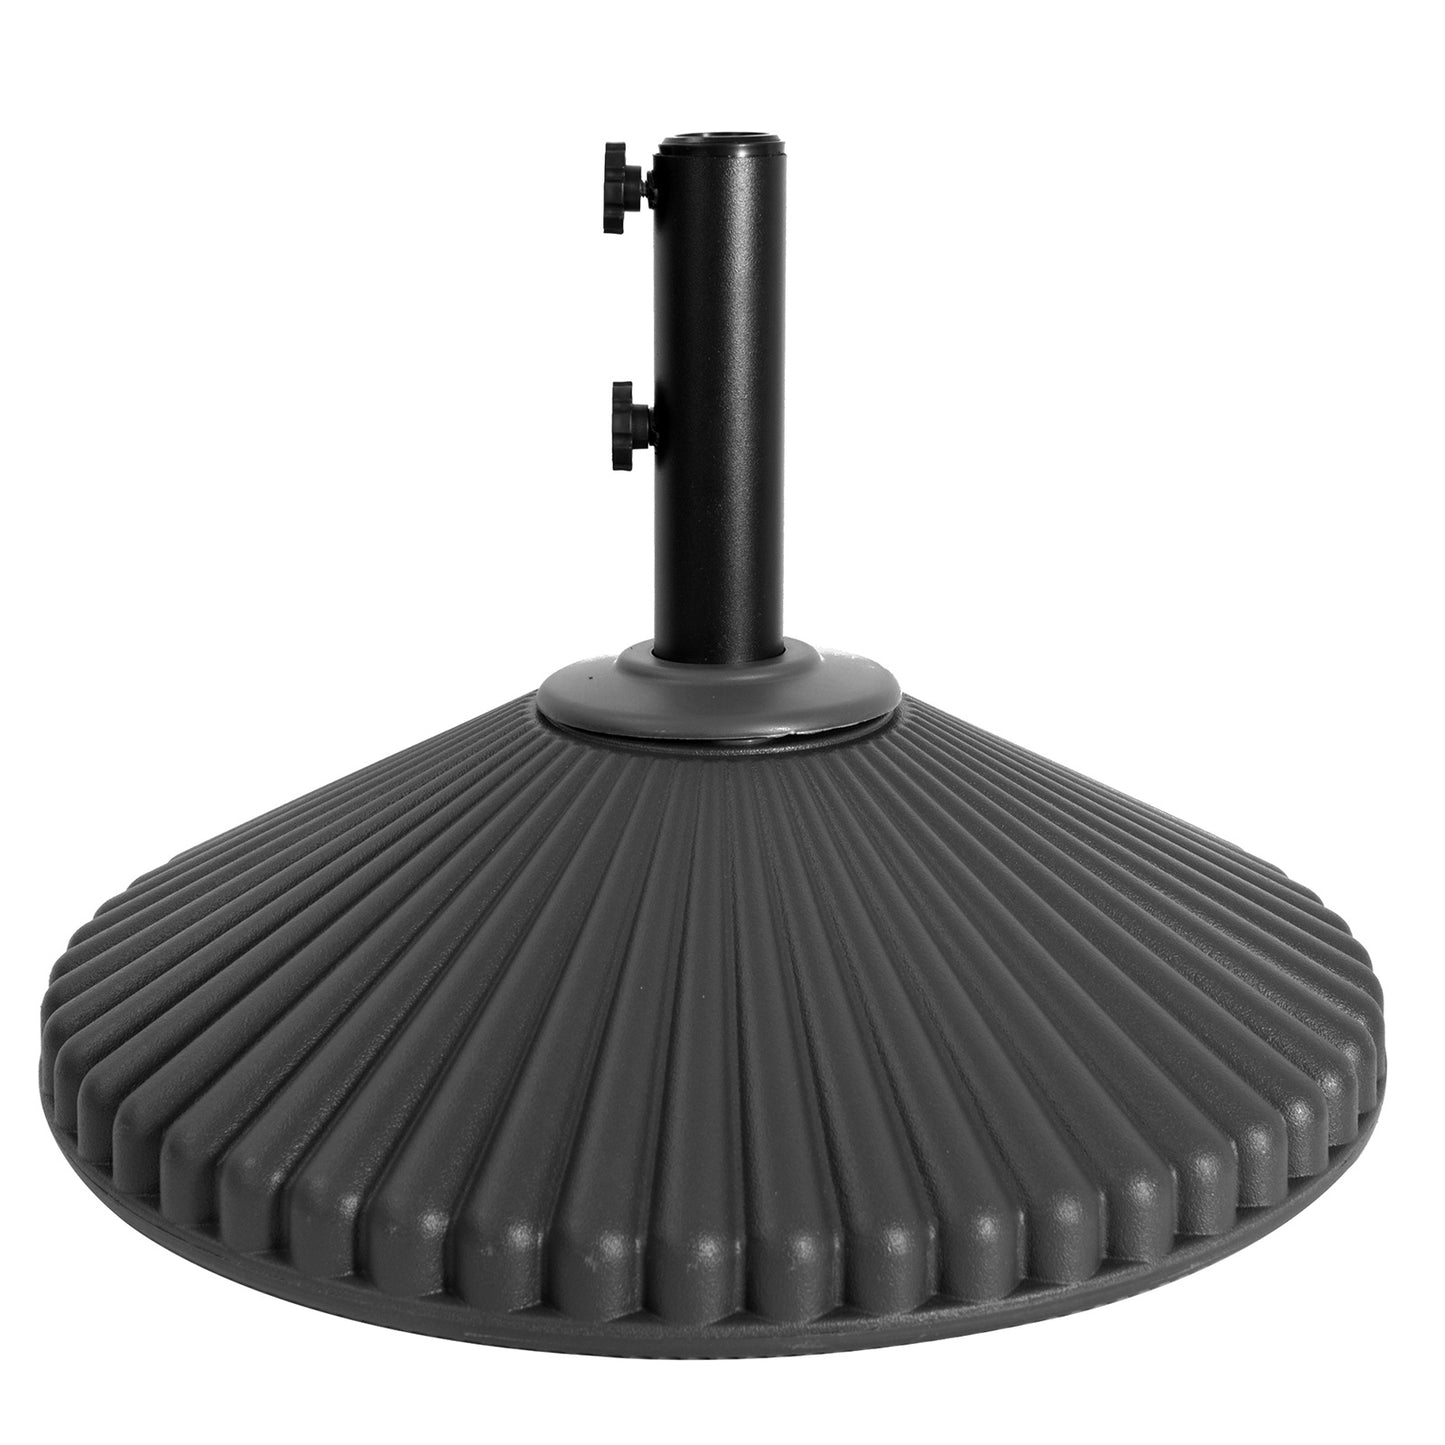 100 lb Patio Umbrella Base 23" Diameter Round Heavy Duty Outdoor Stand Plastic Water and Sand Filled for Deck;  Lawn;  Garden;  Pool;  Market